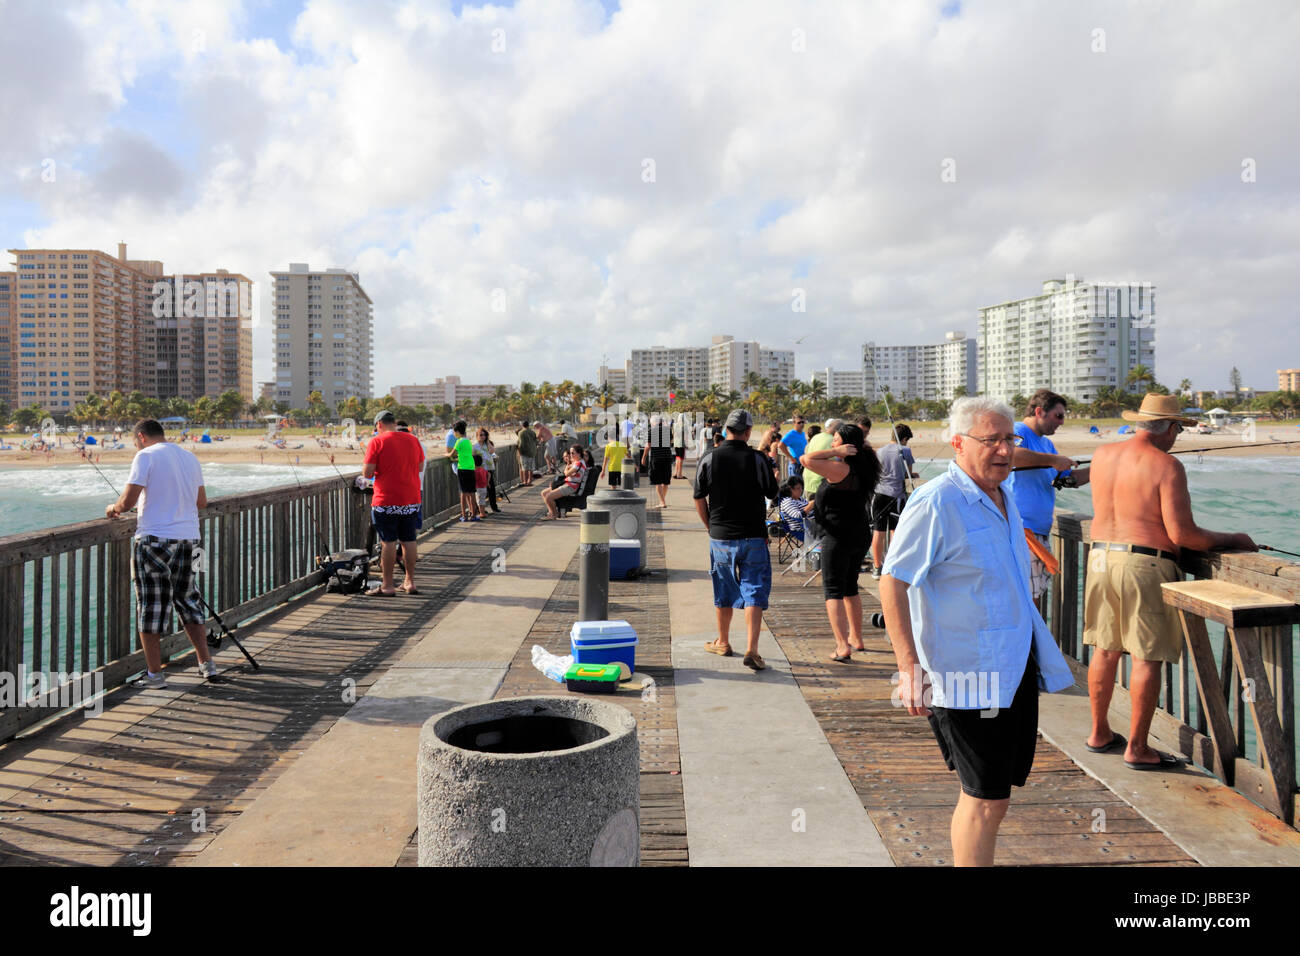 POMPANO BEACH, FLORIDA - DECEMBER 22, 2013: Many people fishing from the very long wood and cement Pompano Beach Municipal Fishing Pier with a view of the beach, bathers and buildings on the coast. Stock Photo